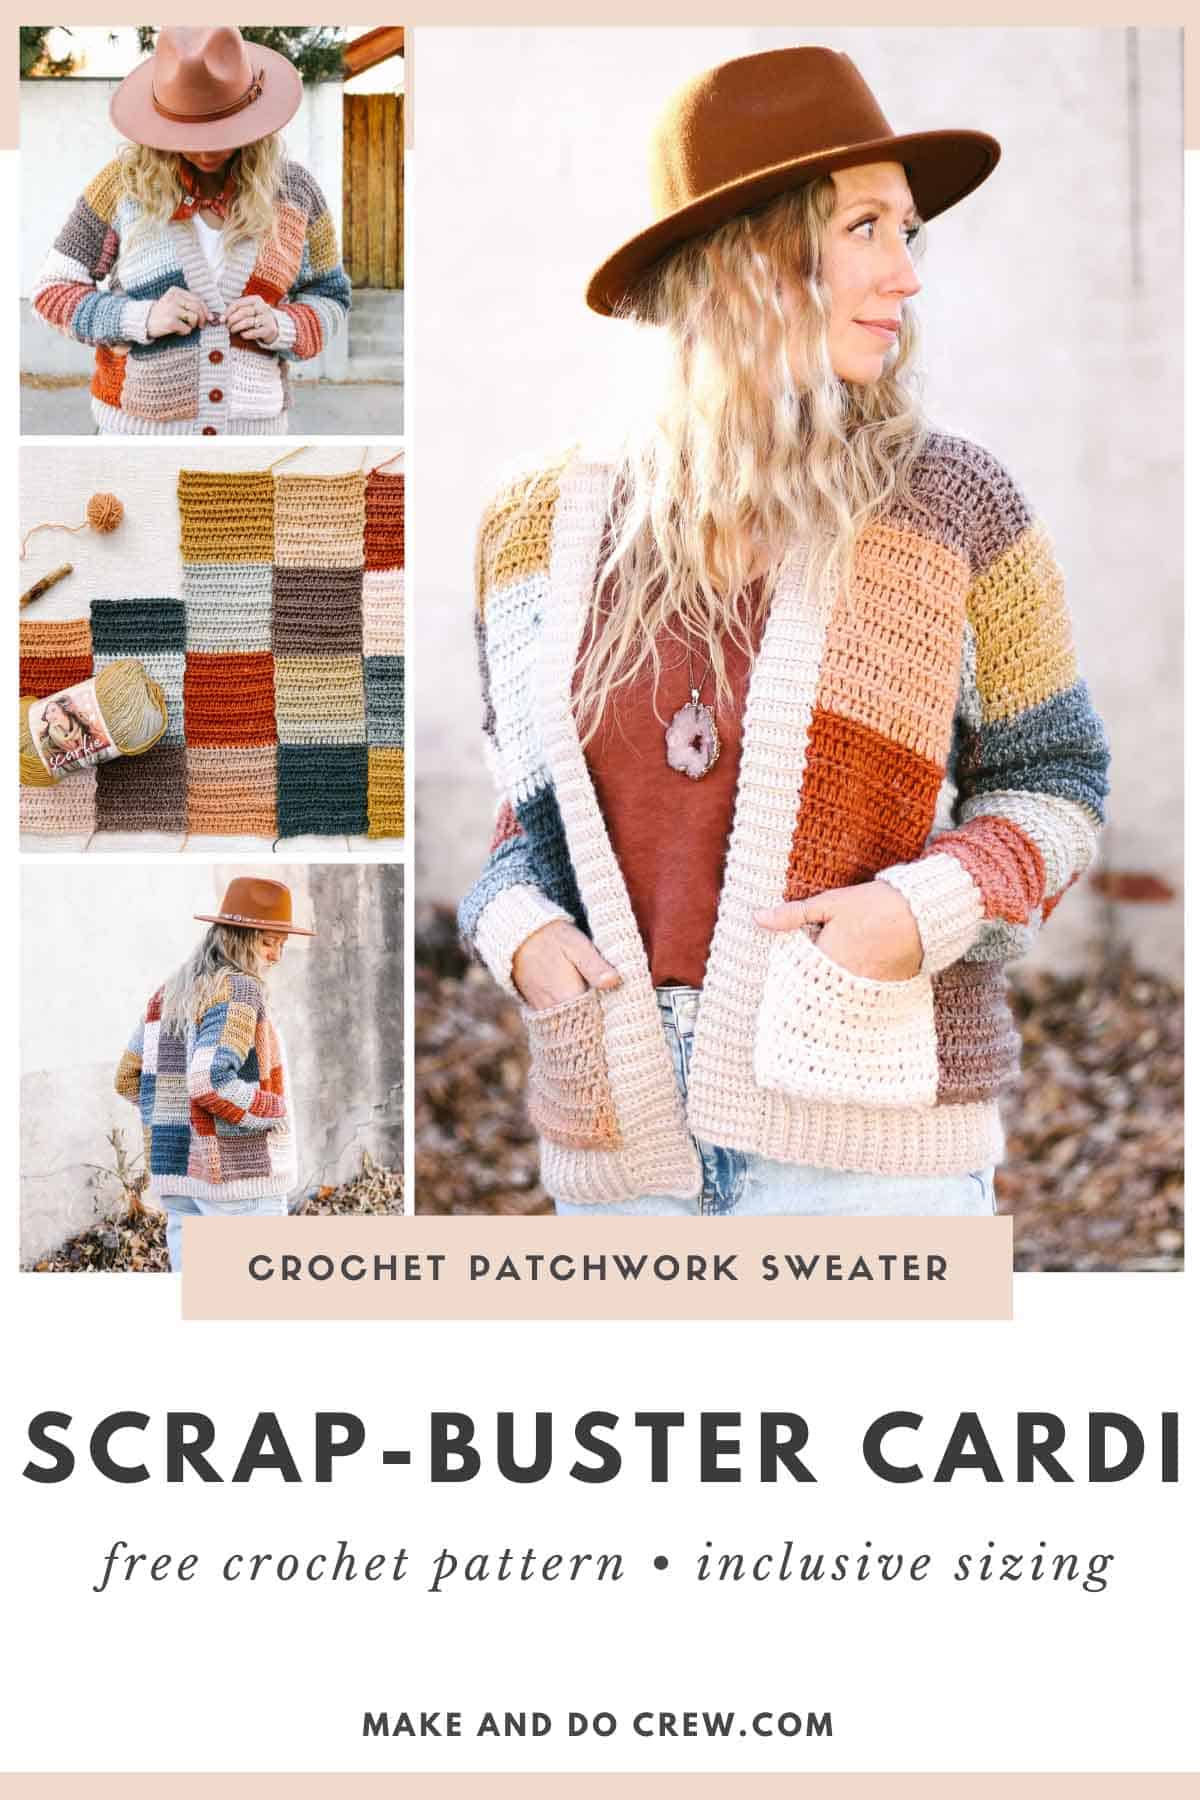 This image shows a grid of four photos, showing off a quilt-inspired crochet cardigan made from rectangles, using Lion Brand Scarfie yarn. A blonde woman is wearing the patchwork cardigan with her hands in the sweater pockets and a brown hat. She is shown buttoning the sweater and facing away from the camera to display the back of the cardigan. 